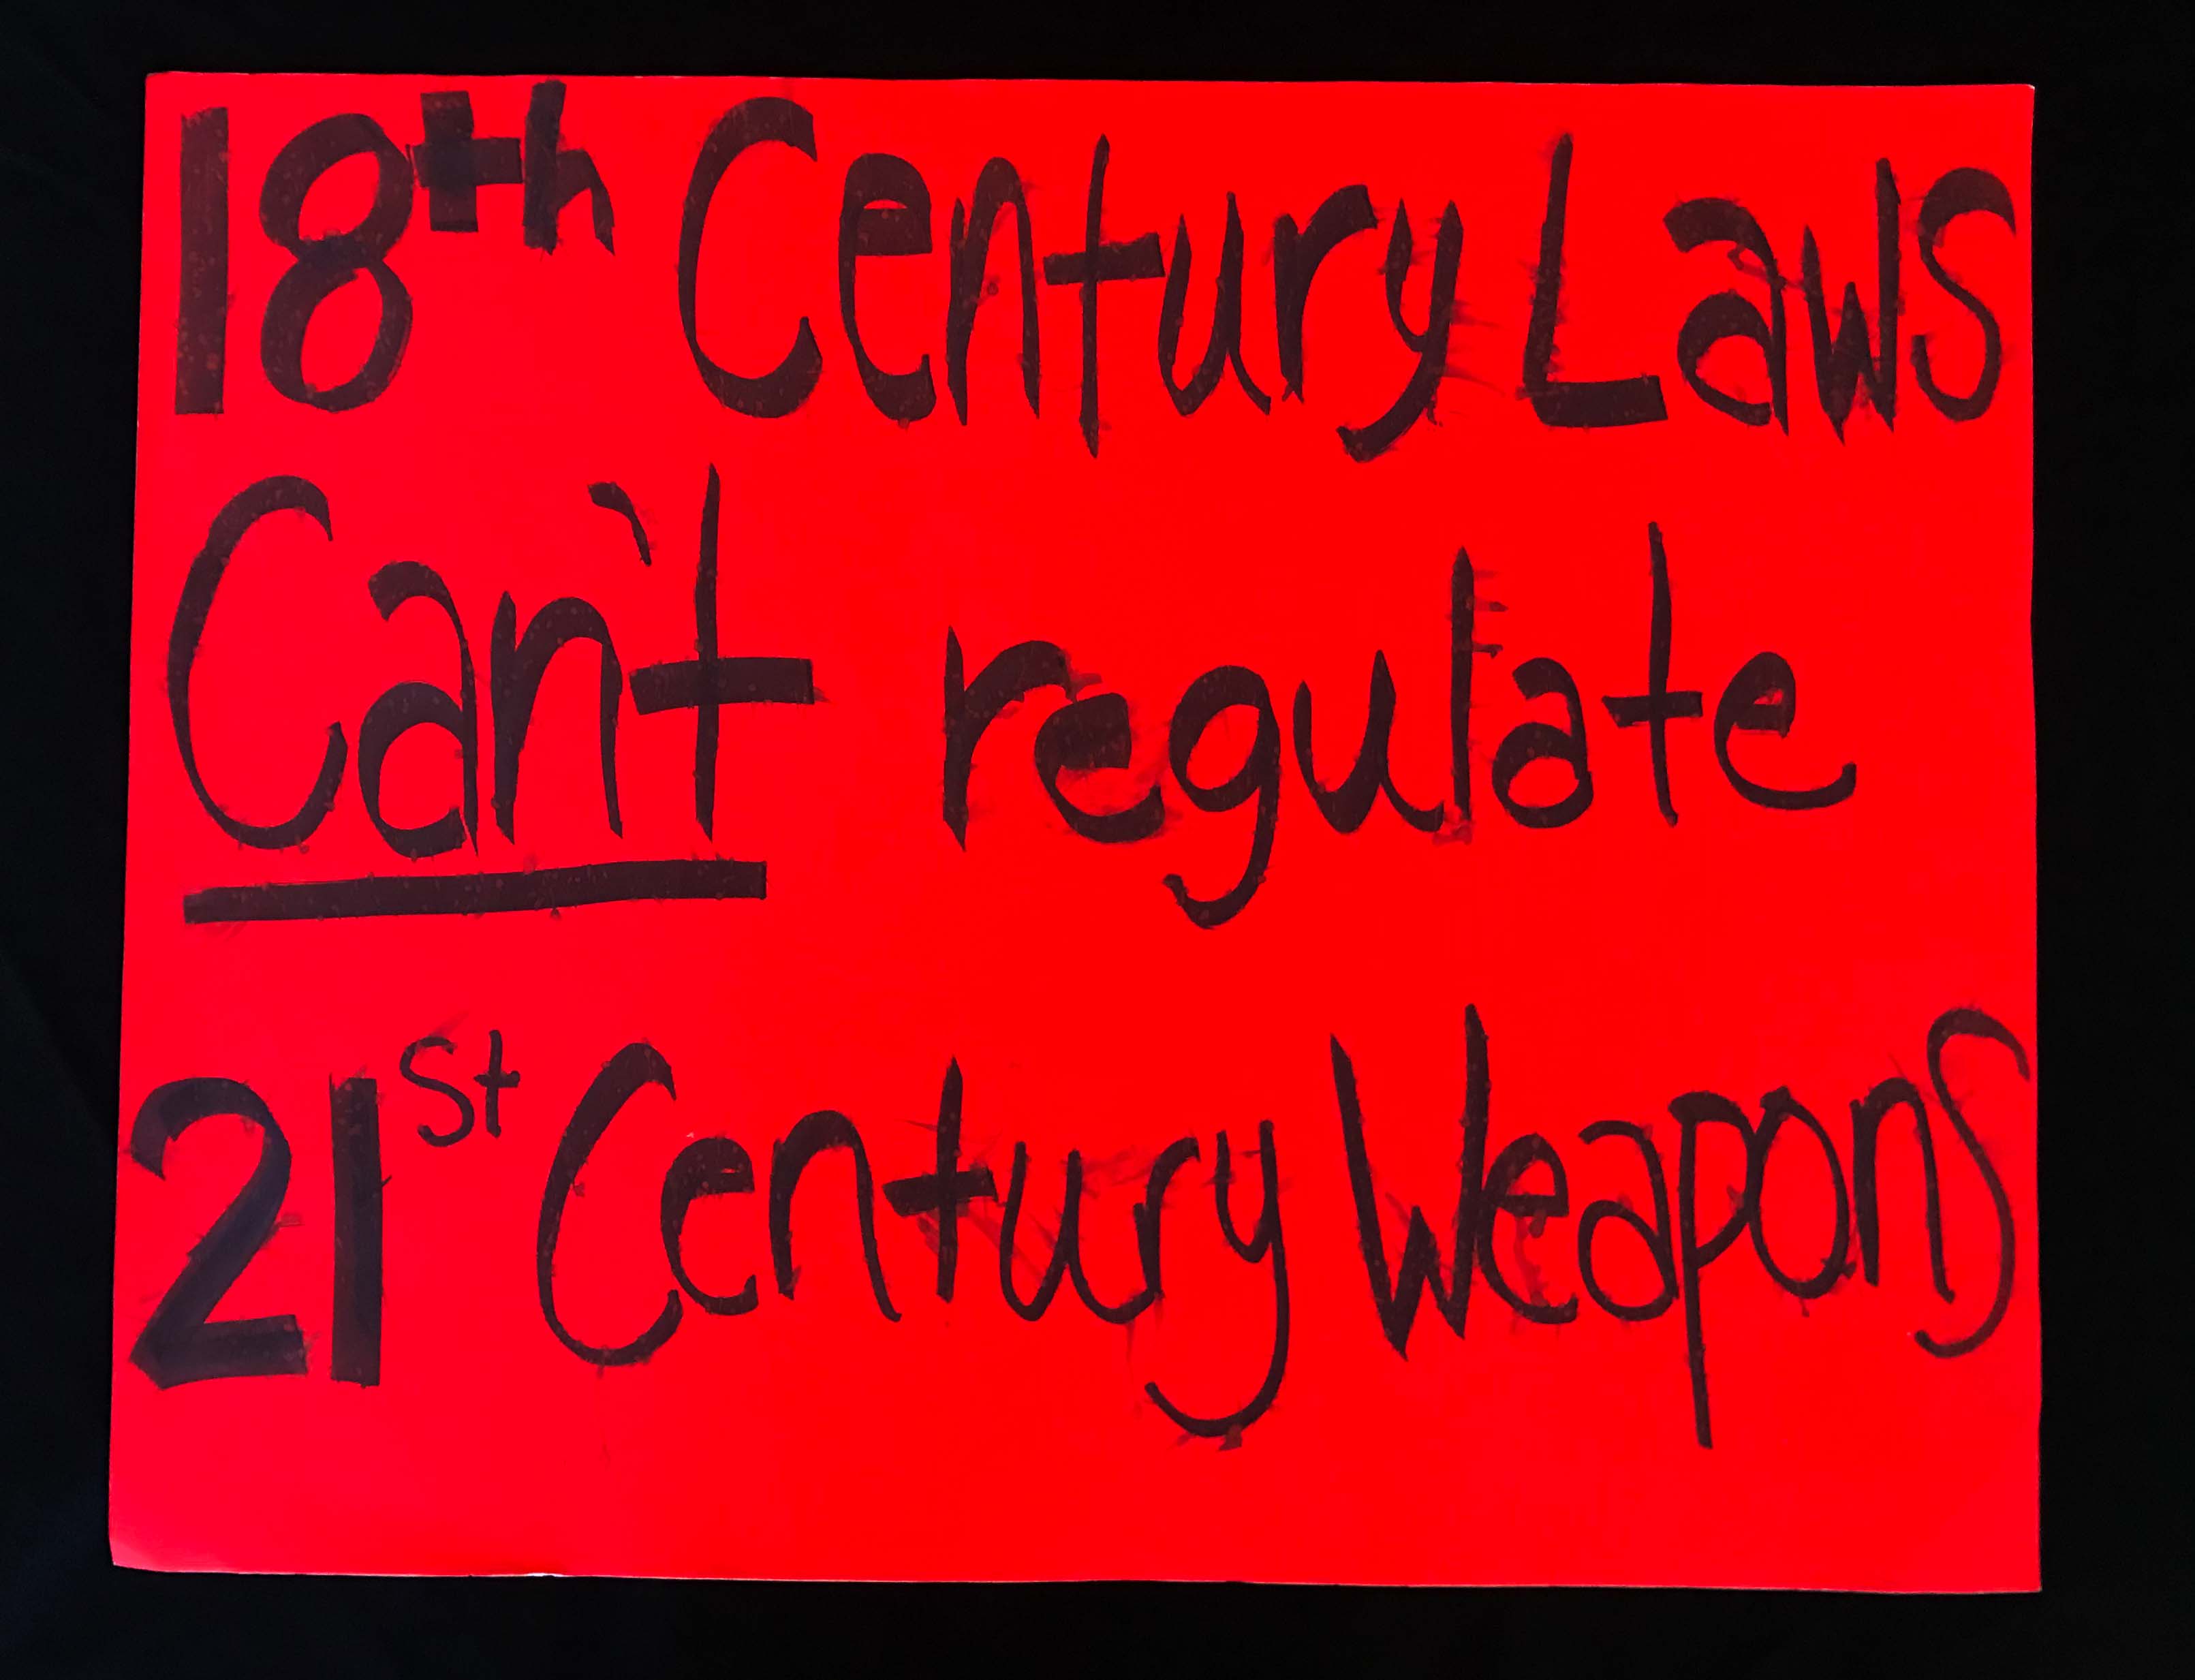 Charlotte March for Our Lives, 2018. Sign reads: "18th-century laws can't regulate 21st-century weapons."